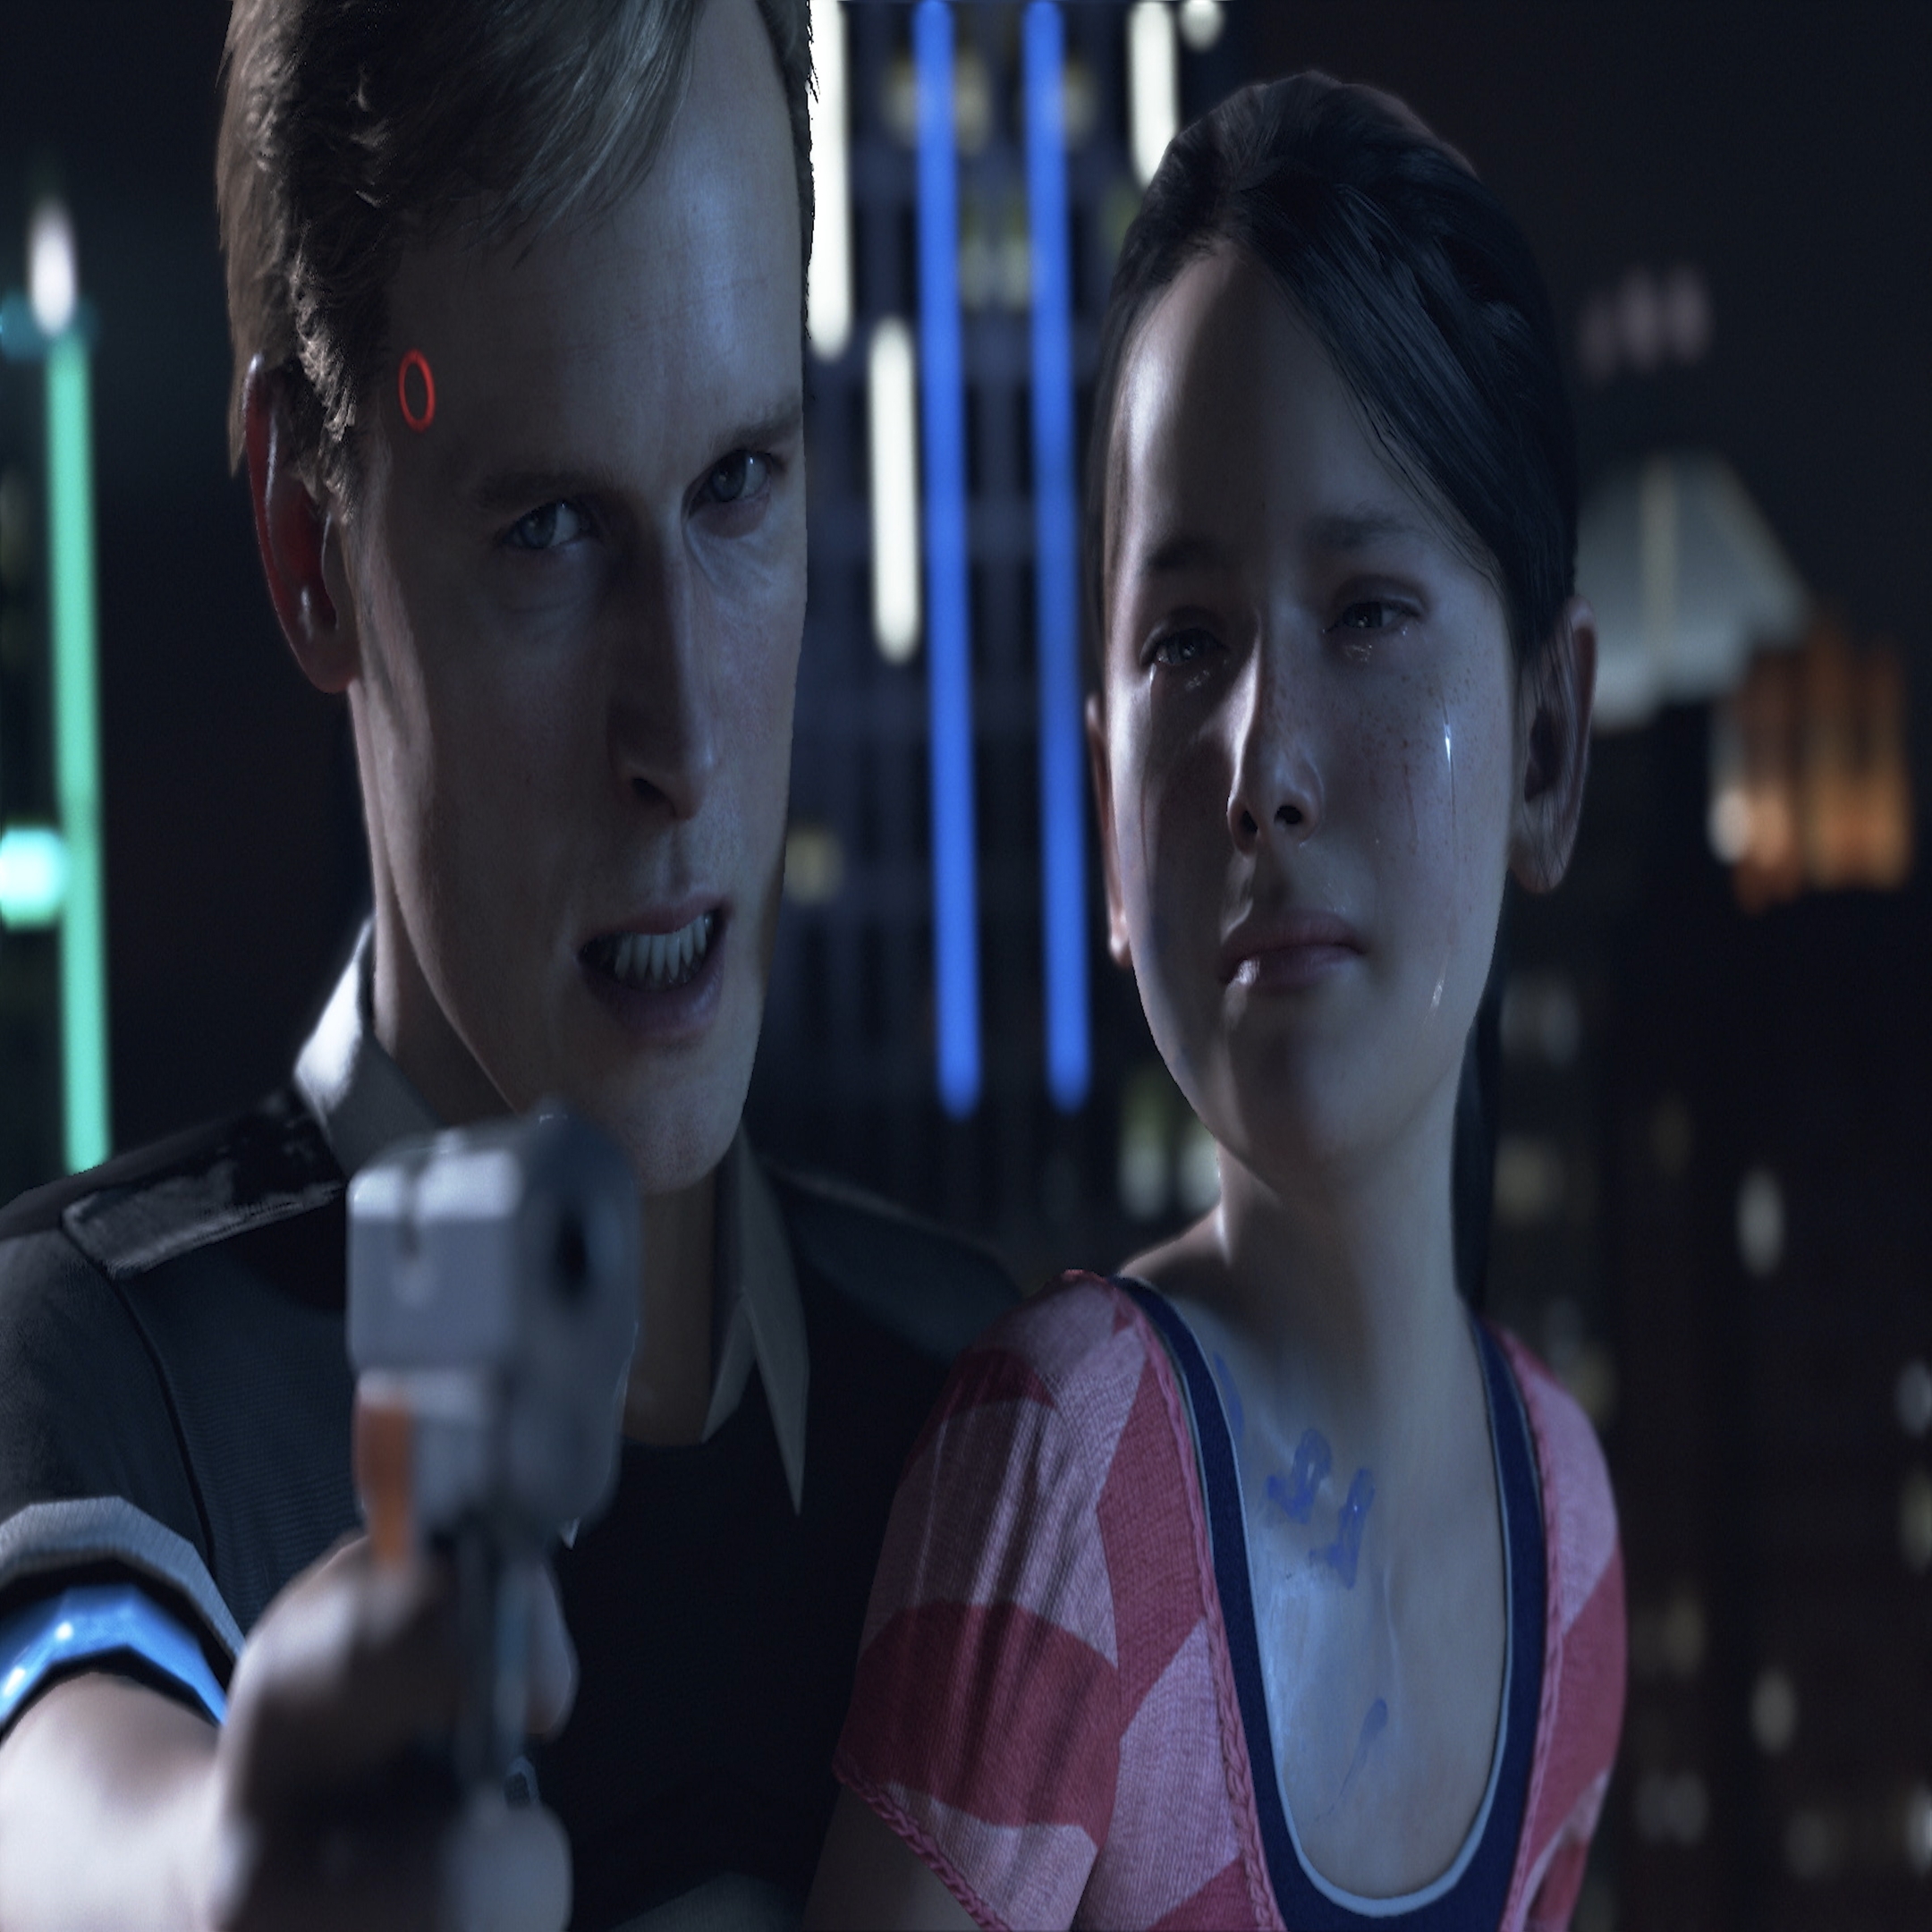 Detroit: Become Human and the Concept of Play